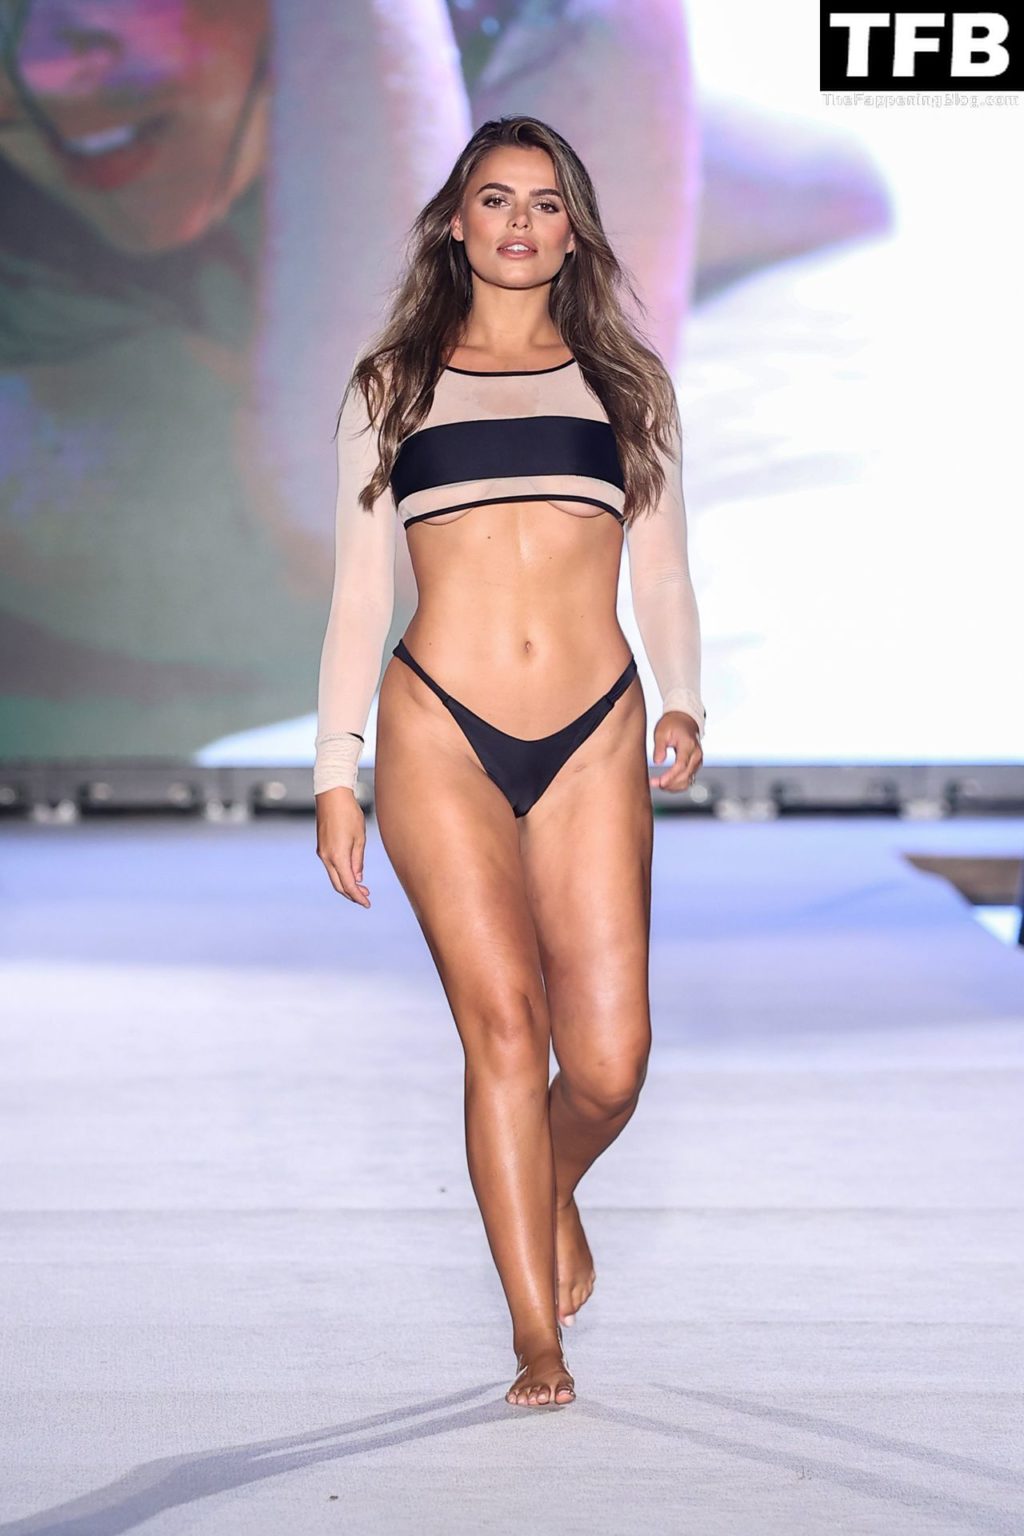 Brooks Nader Displays Her Sexy Figure at the Sports Illustrated Swimsuit Runway Show in Miami Beach (Photos)